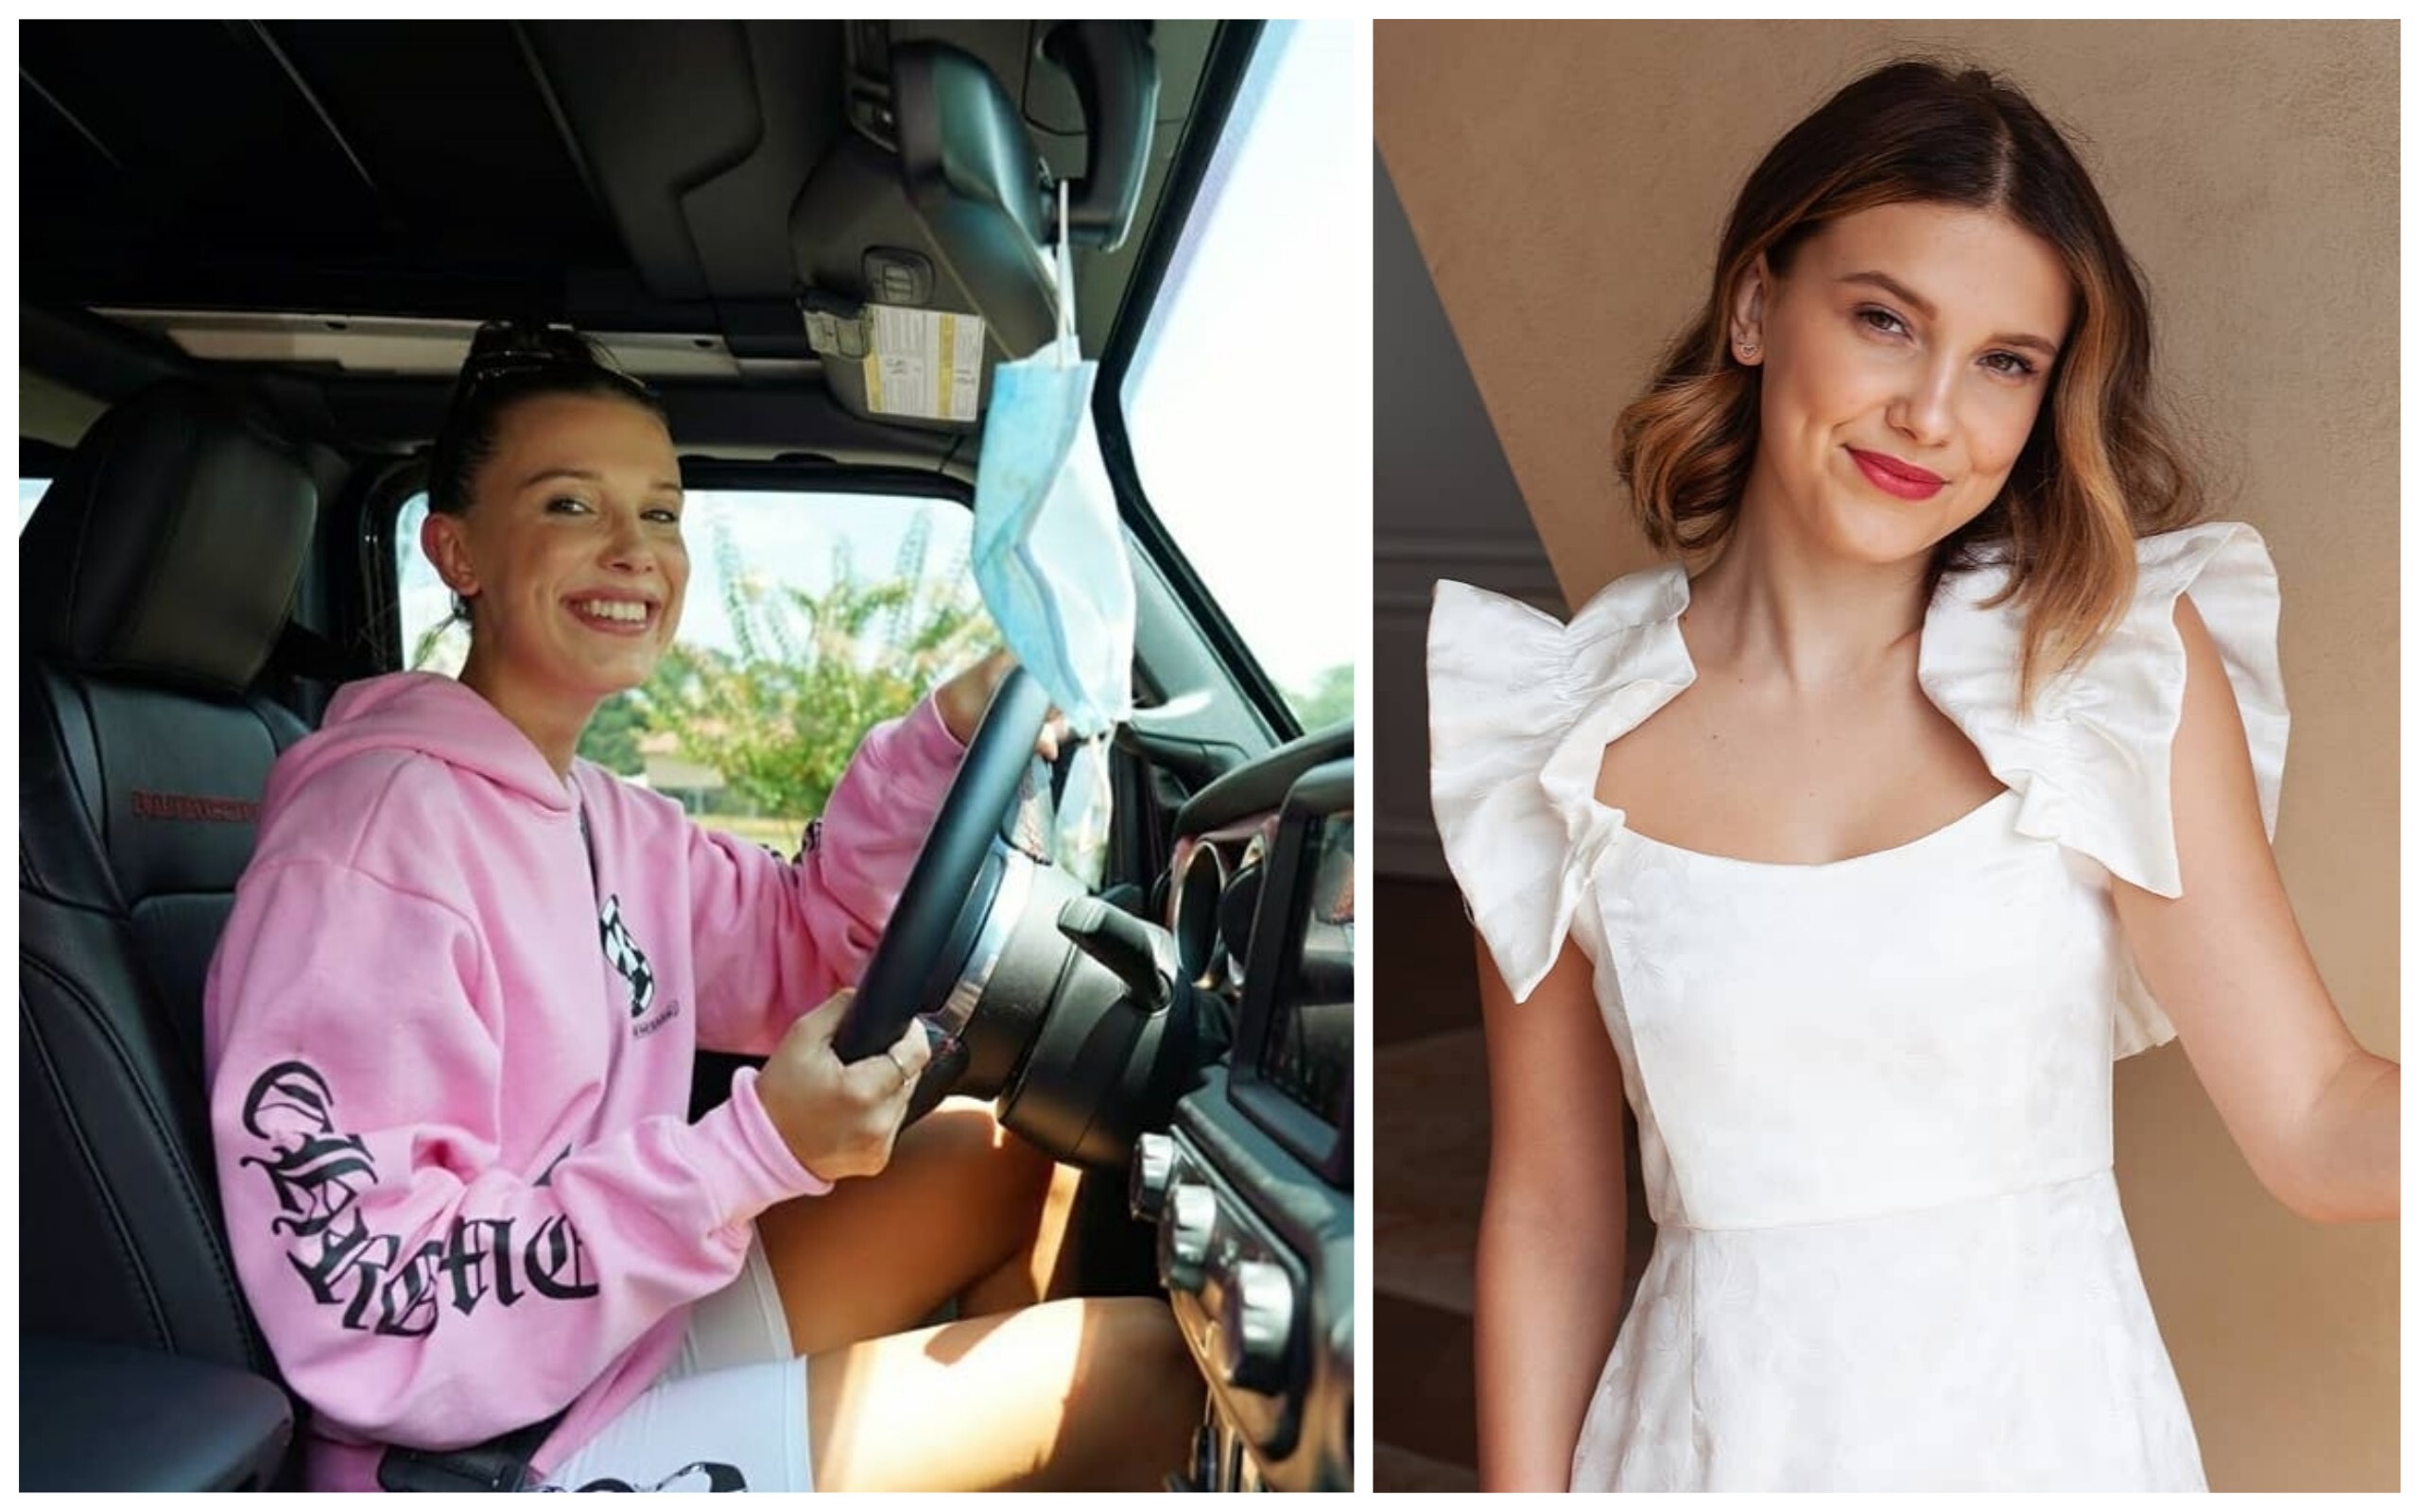 She’s only just passed her driving test, but Stranger Things star Millie Bobby Brown already has some pretty sweet rides. You can do that when you’re worth millions. Photo: @milliebobbybrown/Instagram